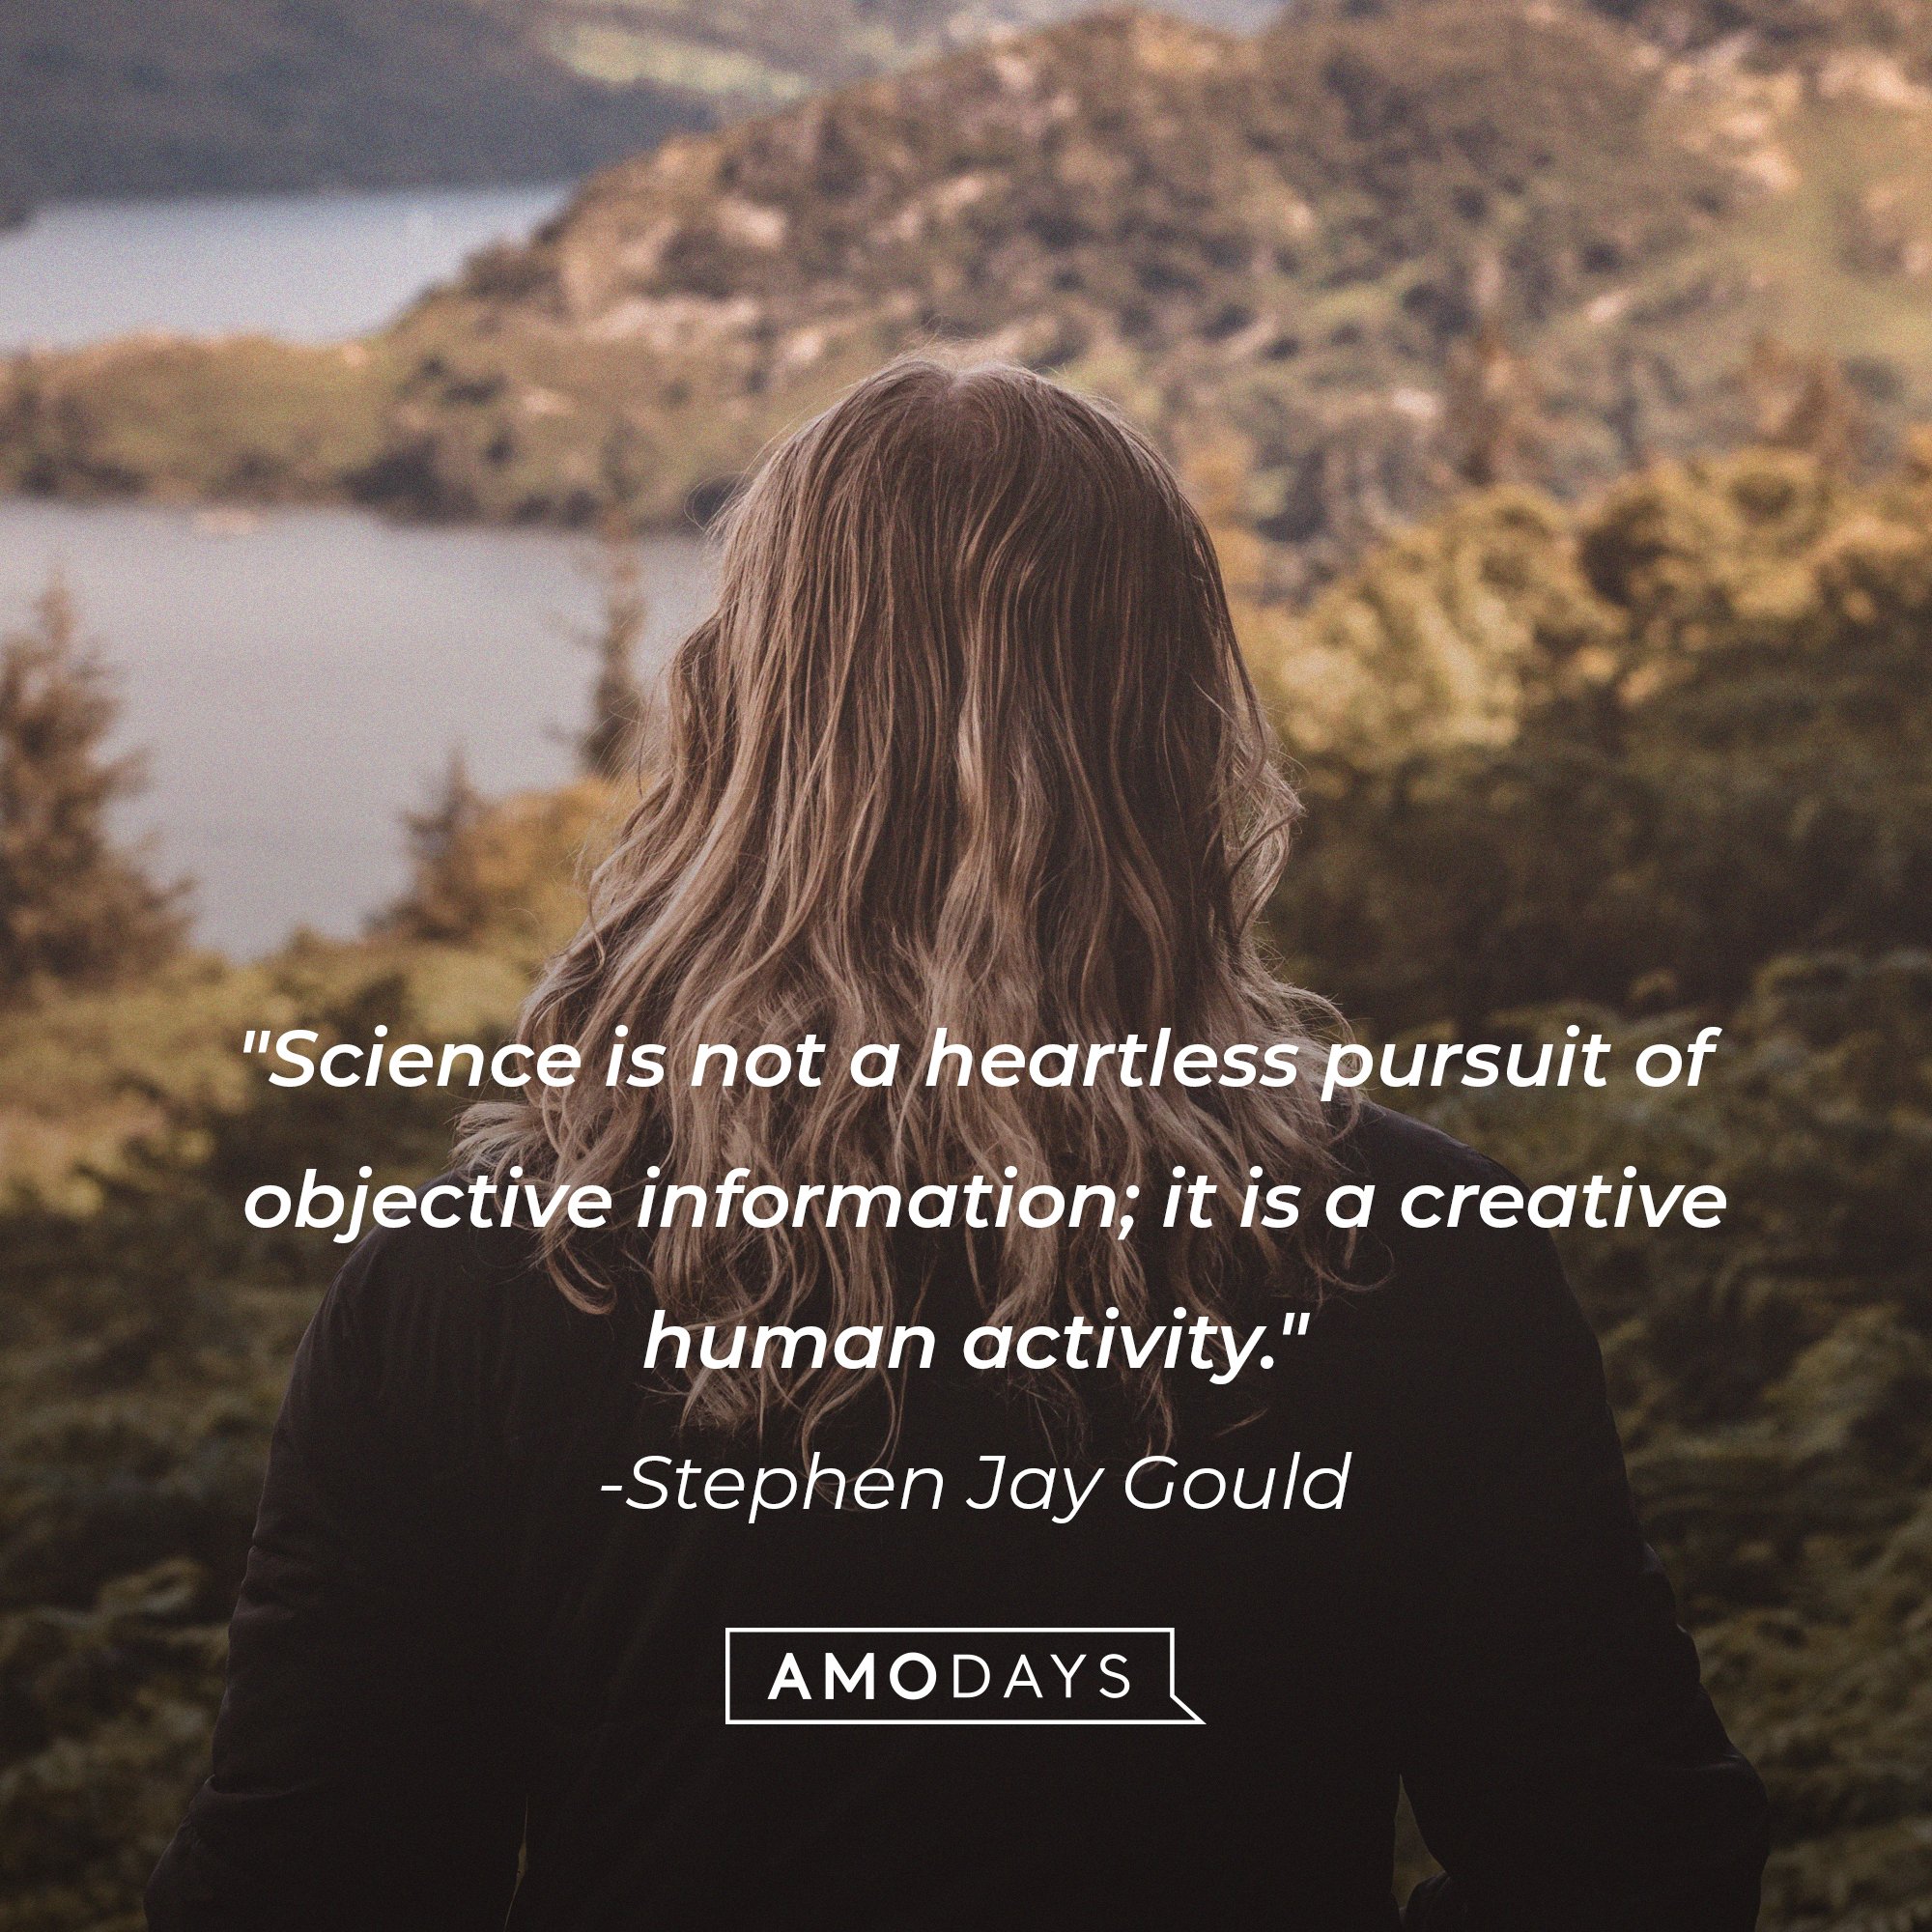 Stephen Jay Gould's quote: "Science is not a heartless pursuit of objective information; it is a creative human activity." | Image: AmoDays